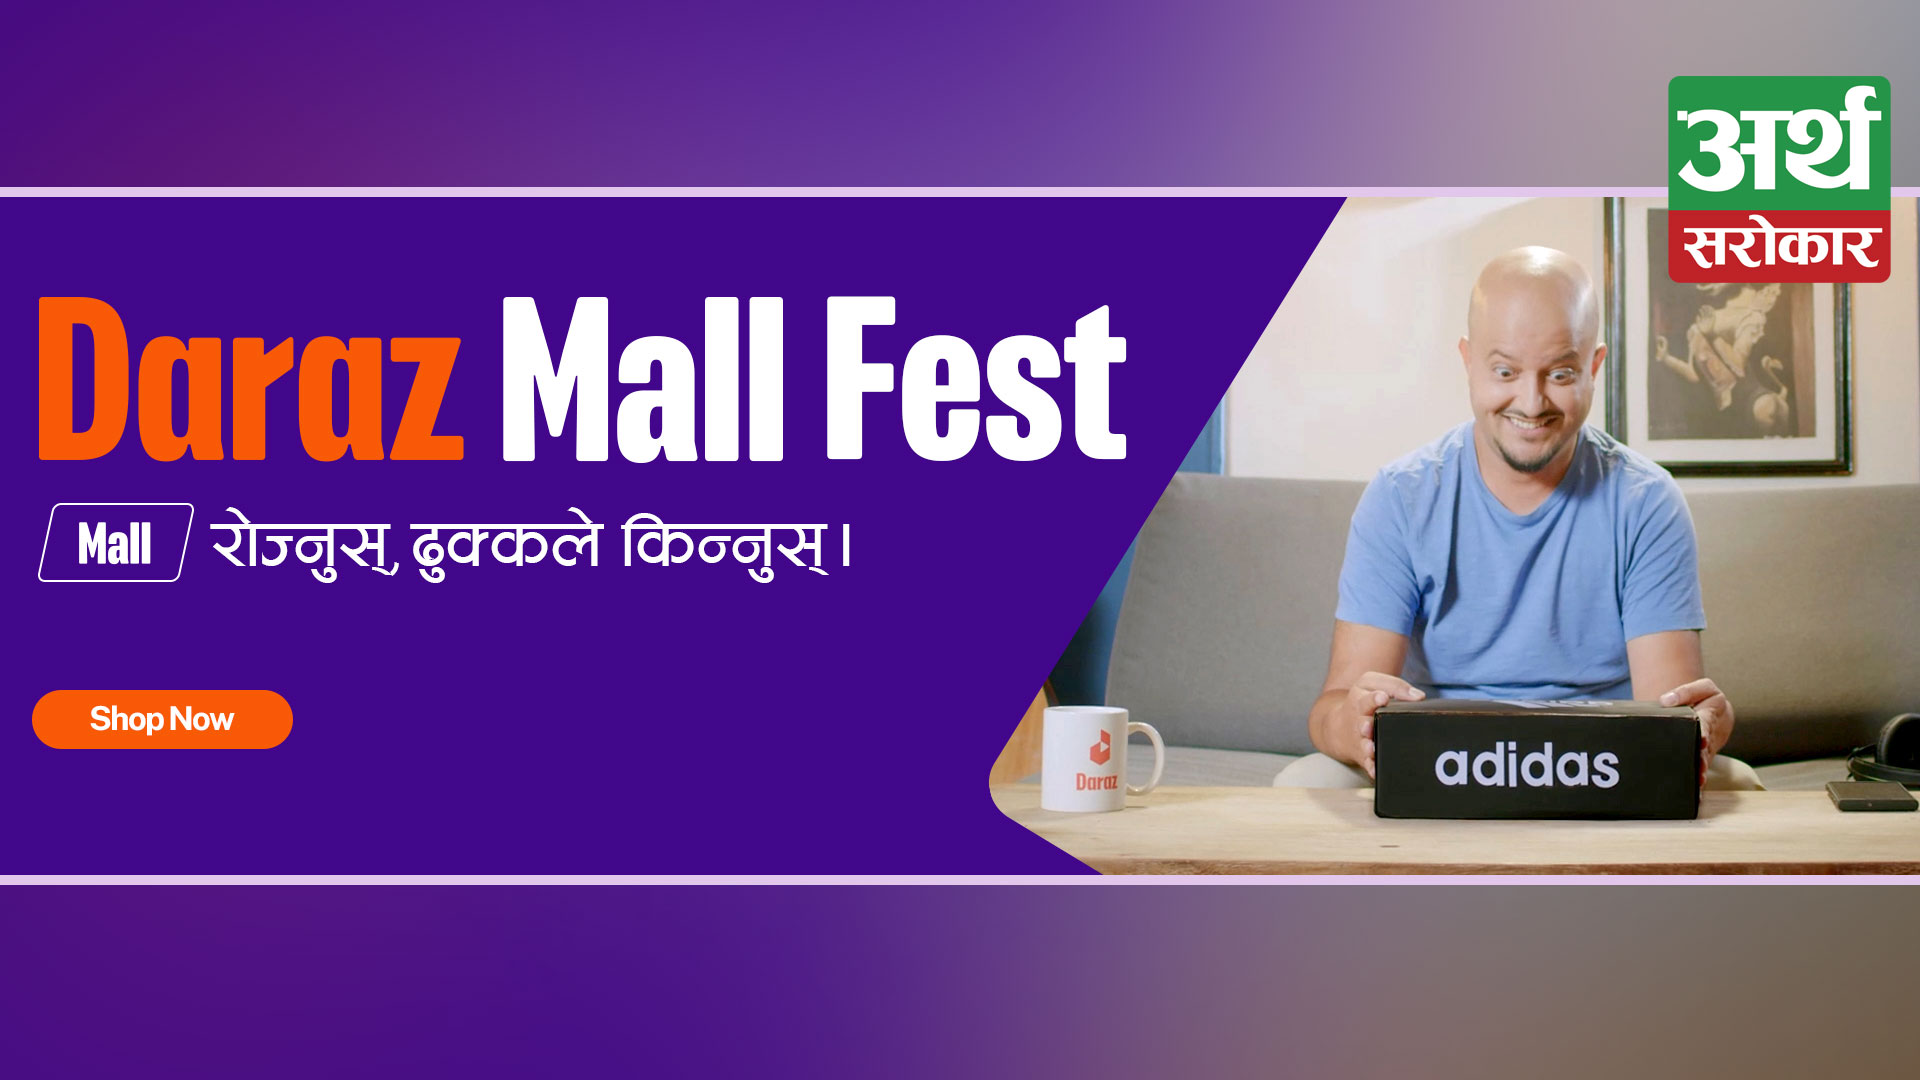 Genuine brands, thousands in product discounts, free vouchers & much more on Daraz Mall Fest – Mall Rojnus, Dhukka Le Kinnus!